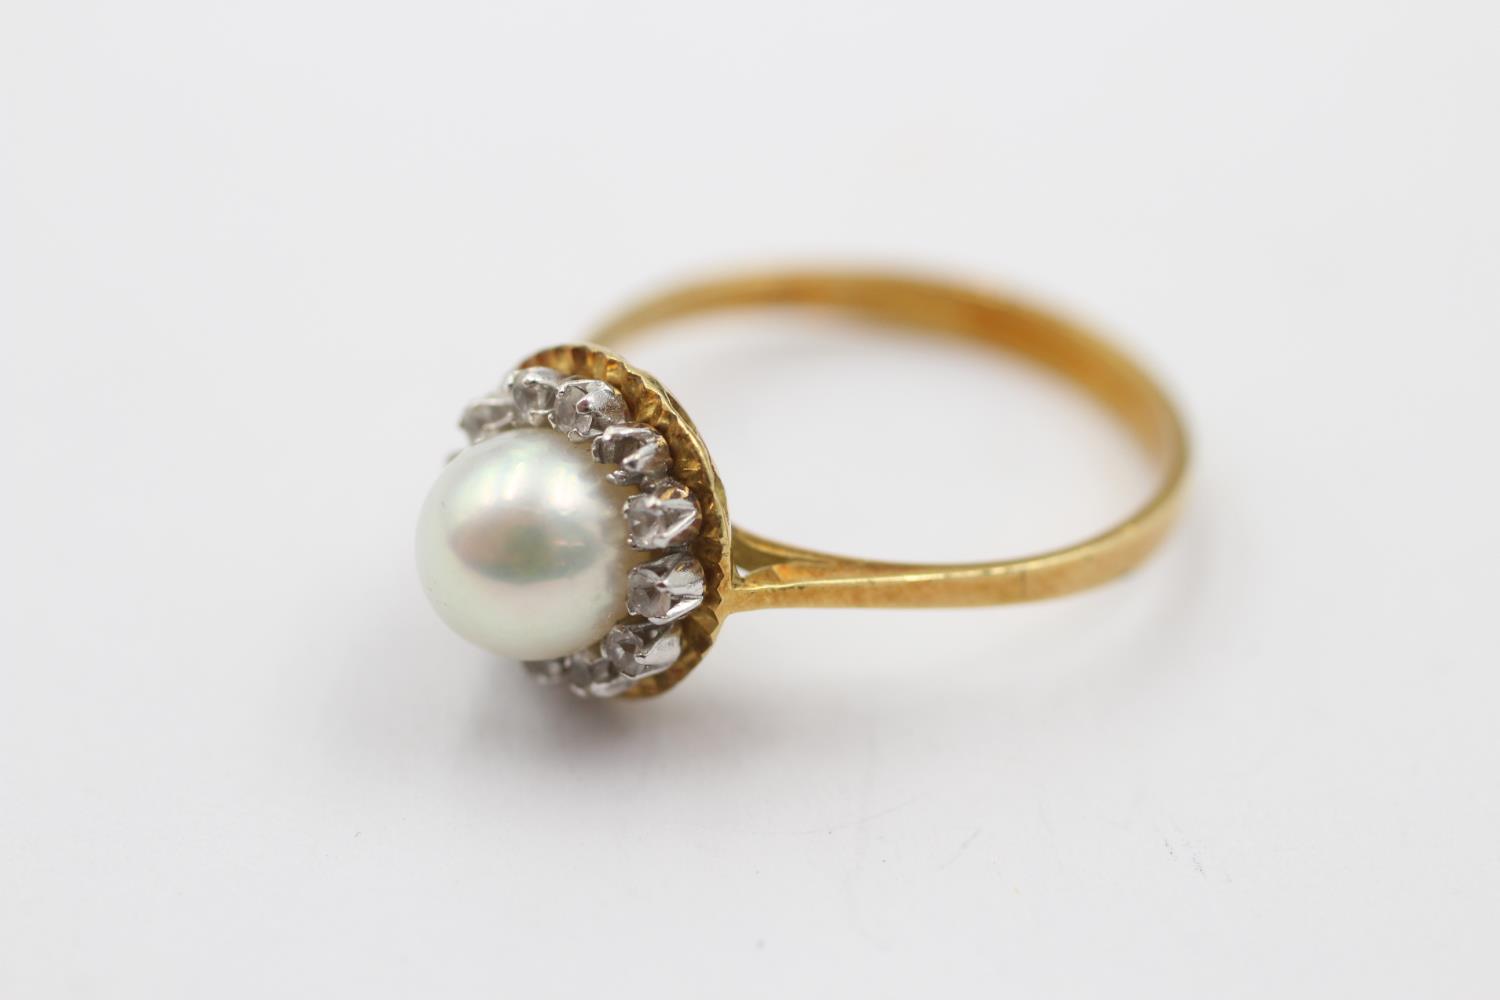 18ct gold pearl & diamond halo dress ring (3.4g) size Q - Image 2 of 4